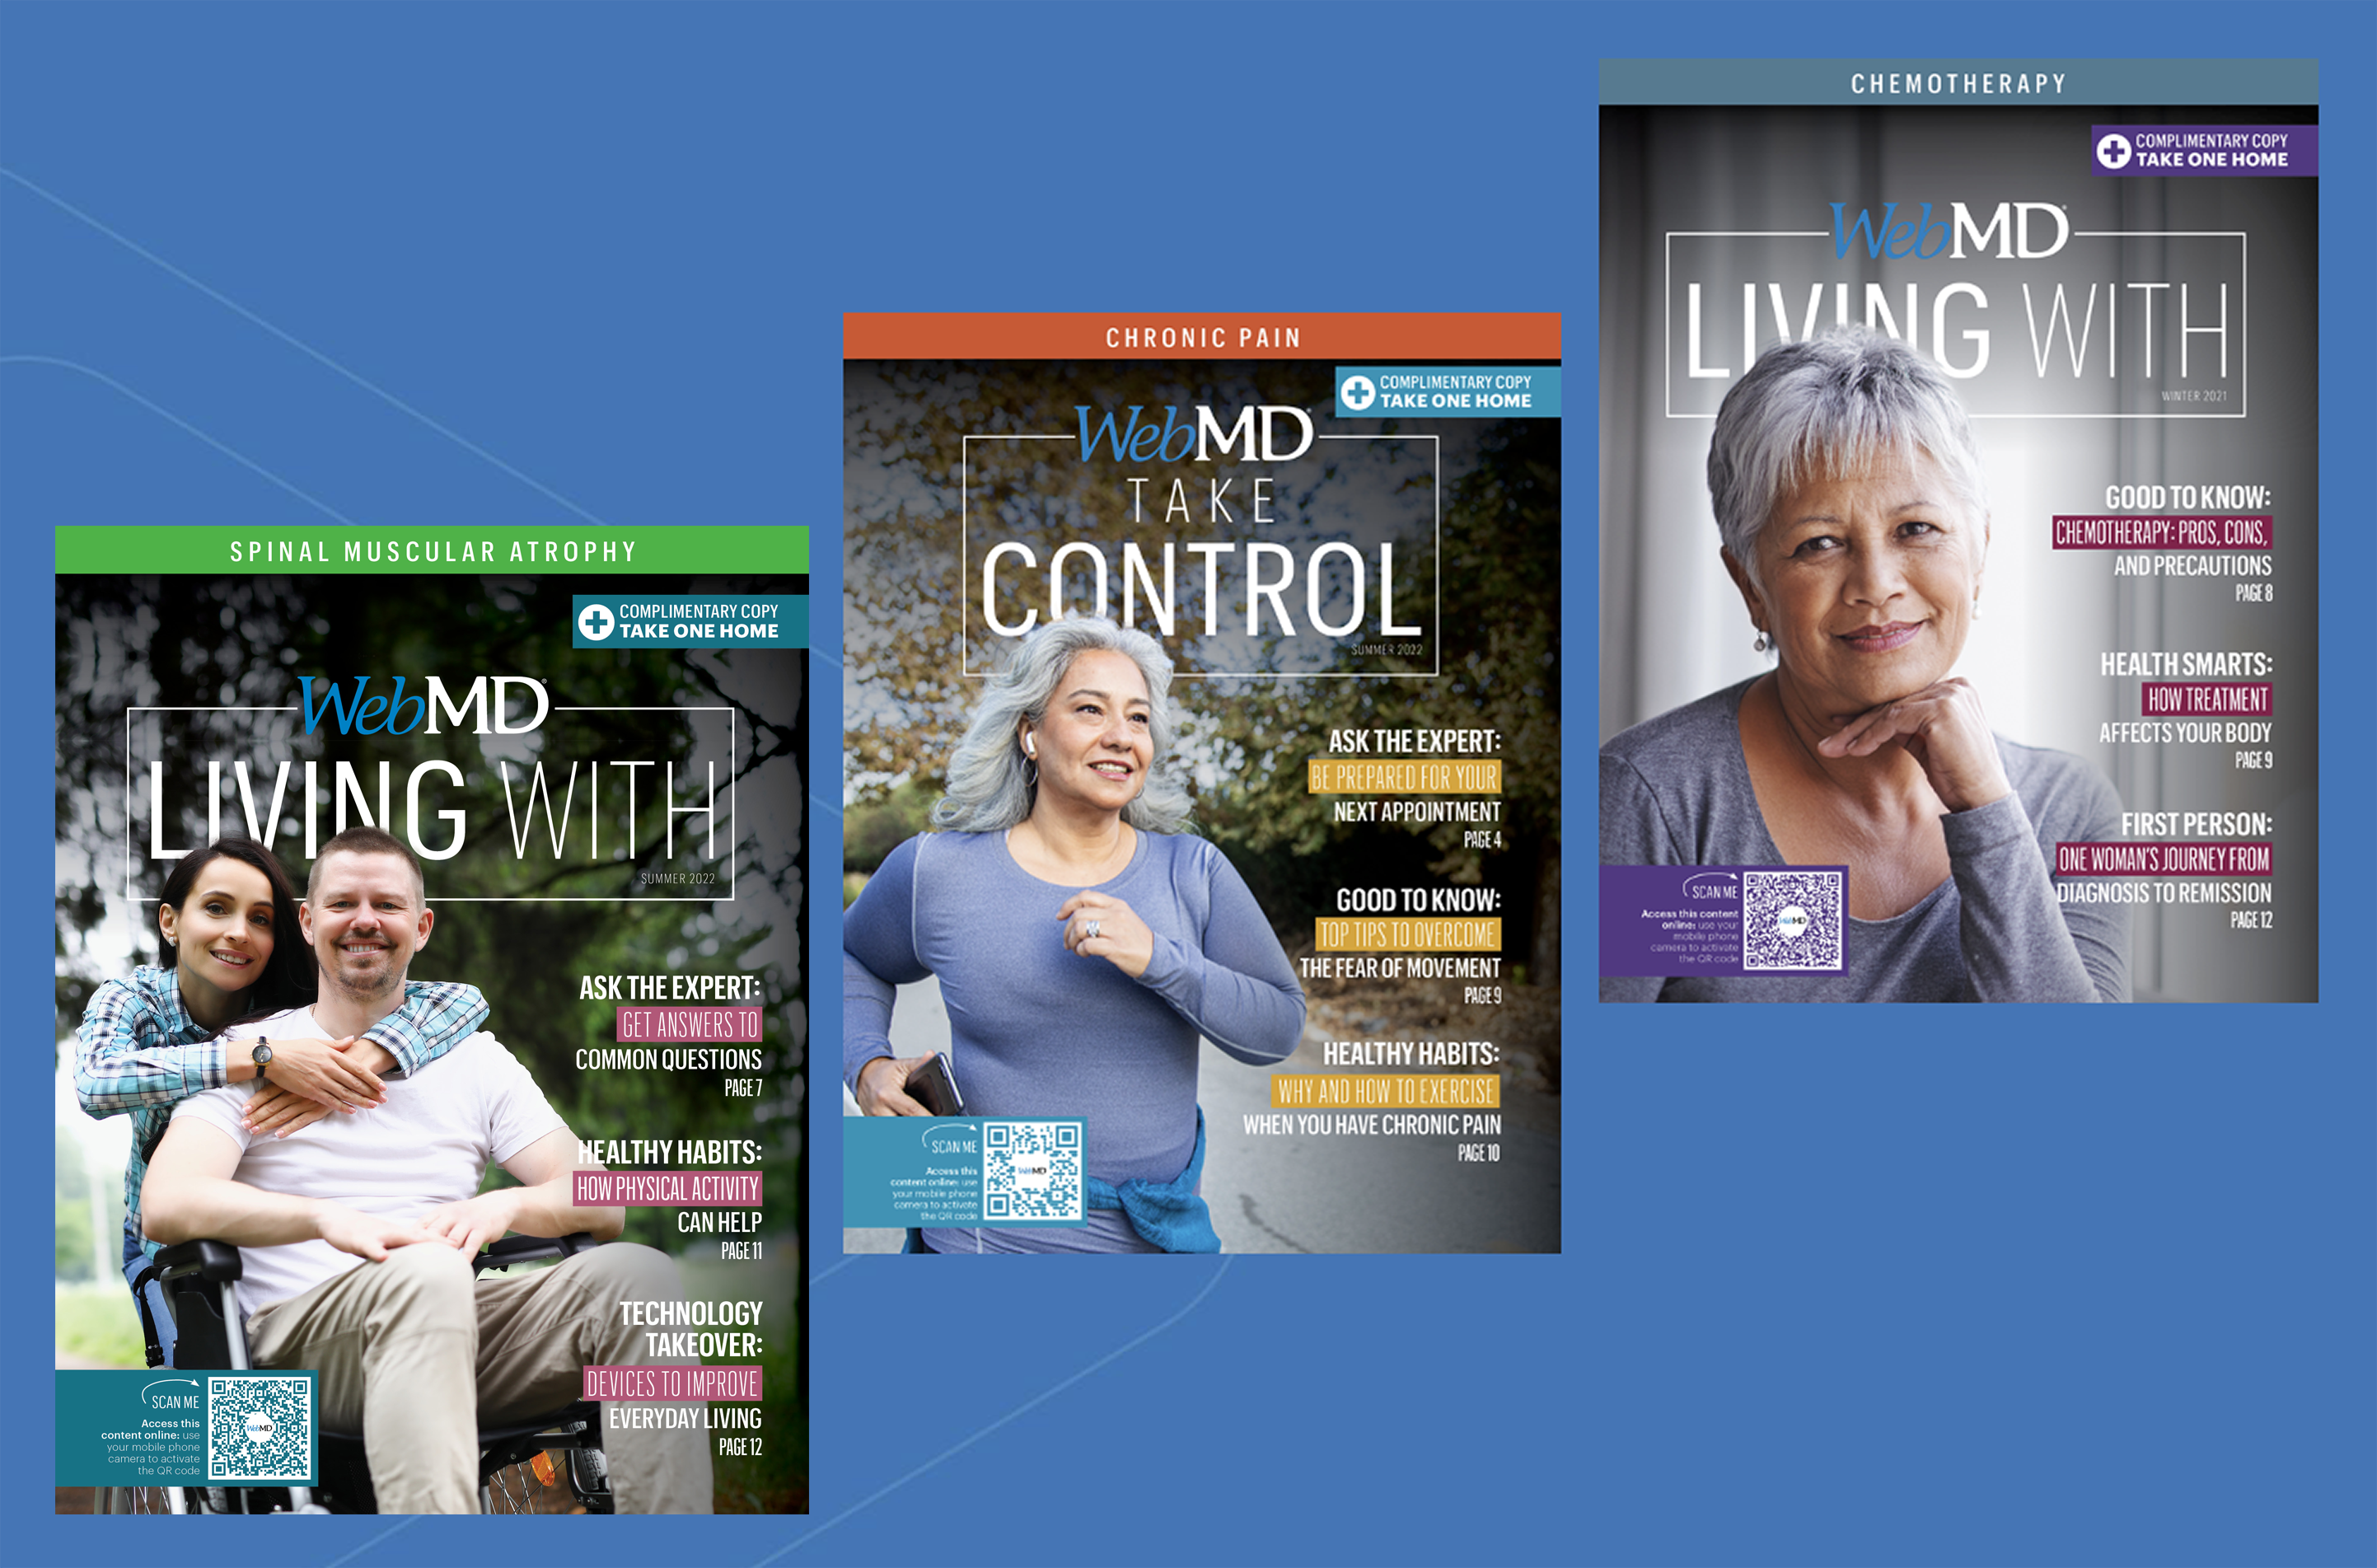 Custom Condition GuidesWebMD custom condition guides offer a fresh and dynamic approach to understanding health and wellness in today’s climate. The guides provide personalization on a variety of topics for audience engagement.